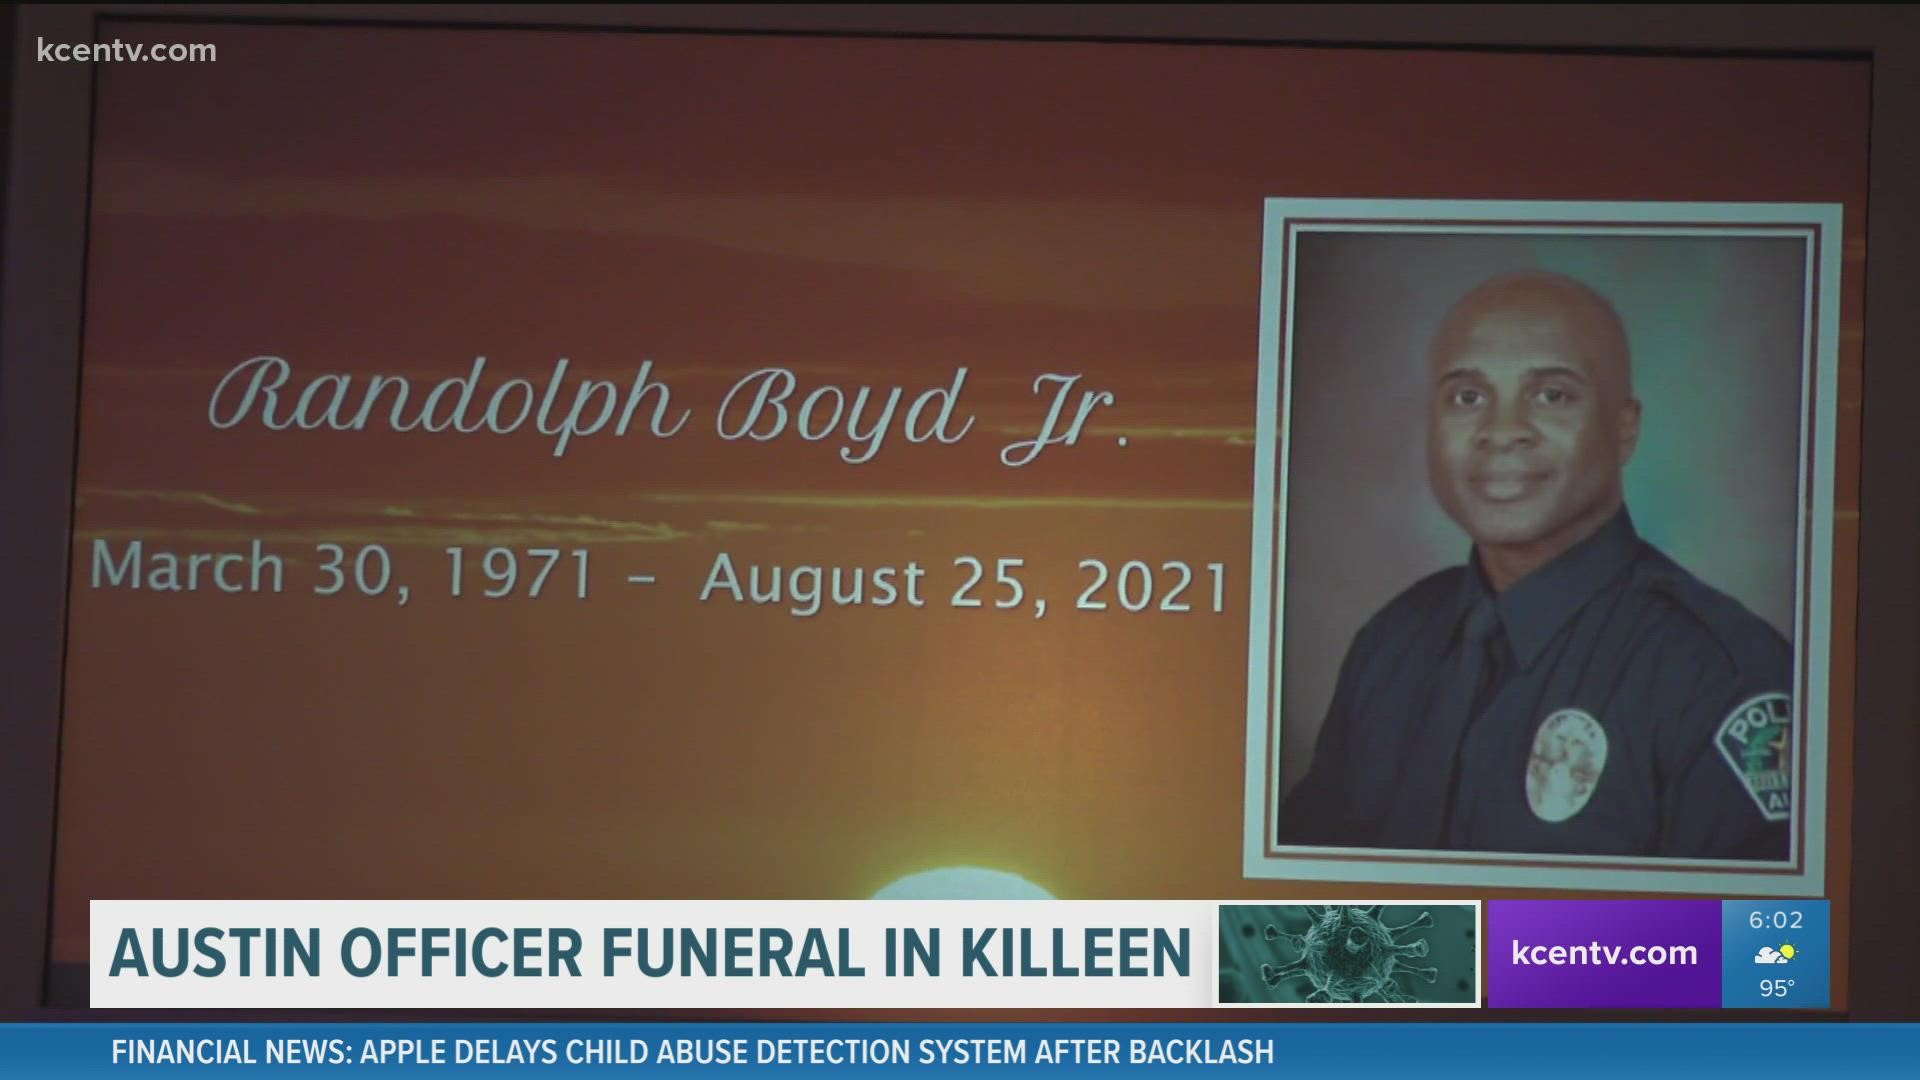 Senior Patrol Officer Randolph Boyd worked for the Austin Police Department but lived with his family in Killeen.